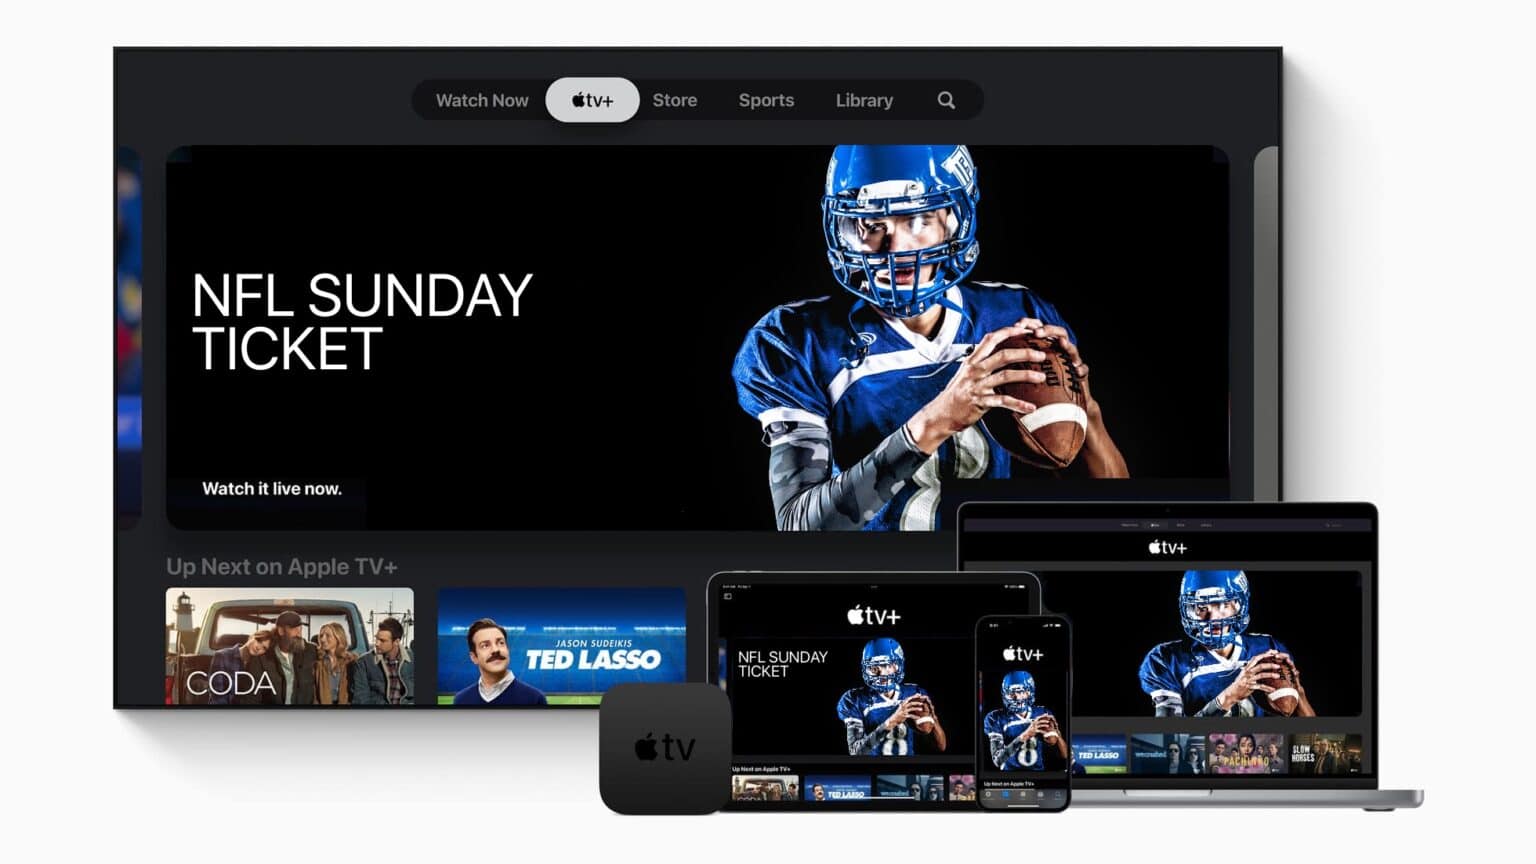 It seems the new NFL Plus streaming service could go to the bidder who wins NFL Sunday Ticket.